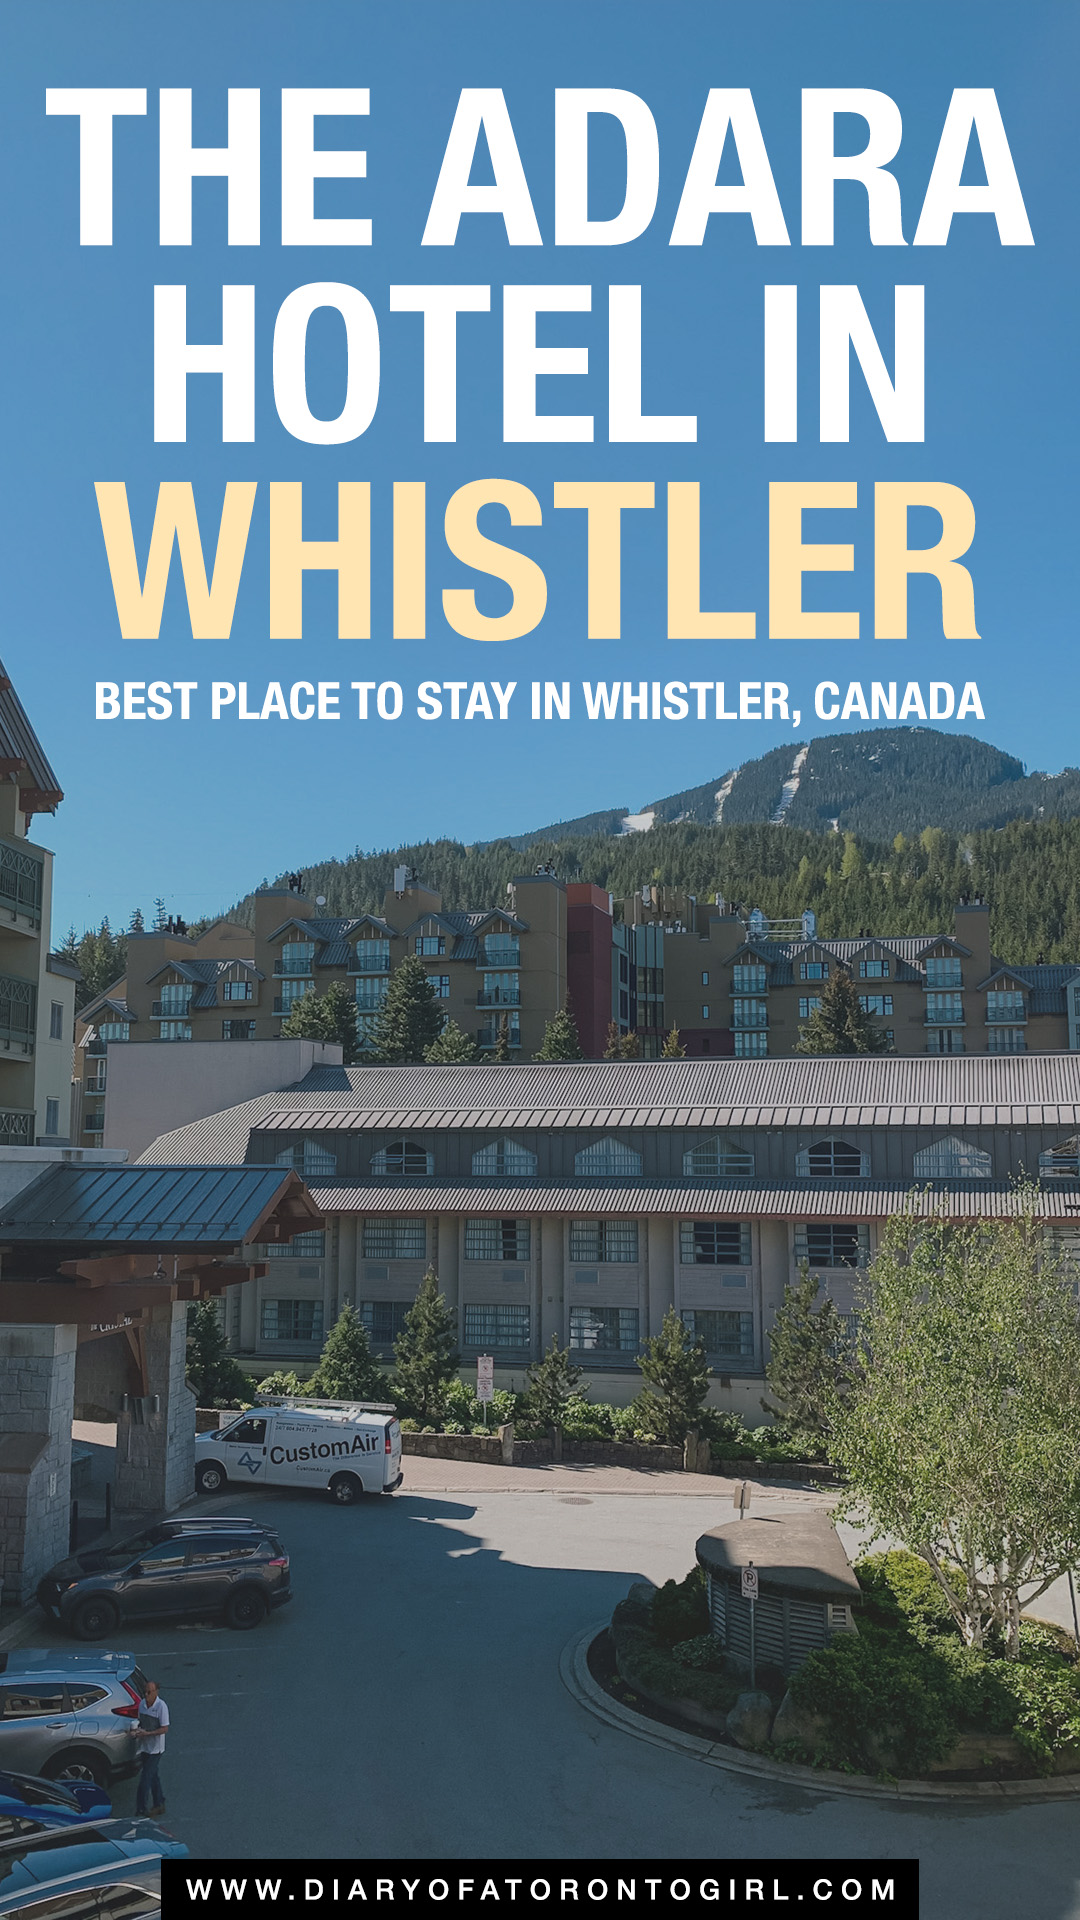 The Adara Hotel Whistler review